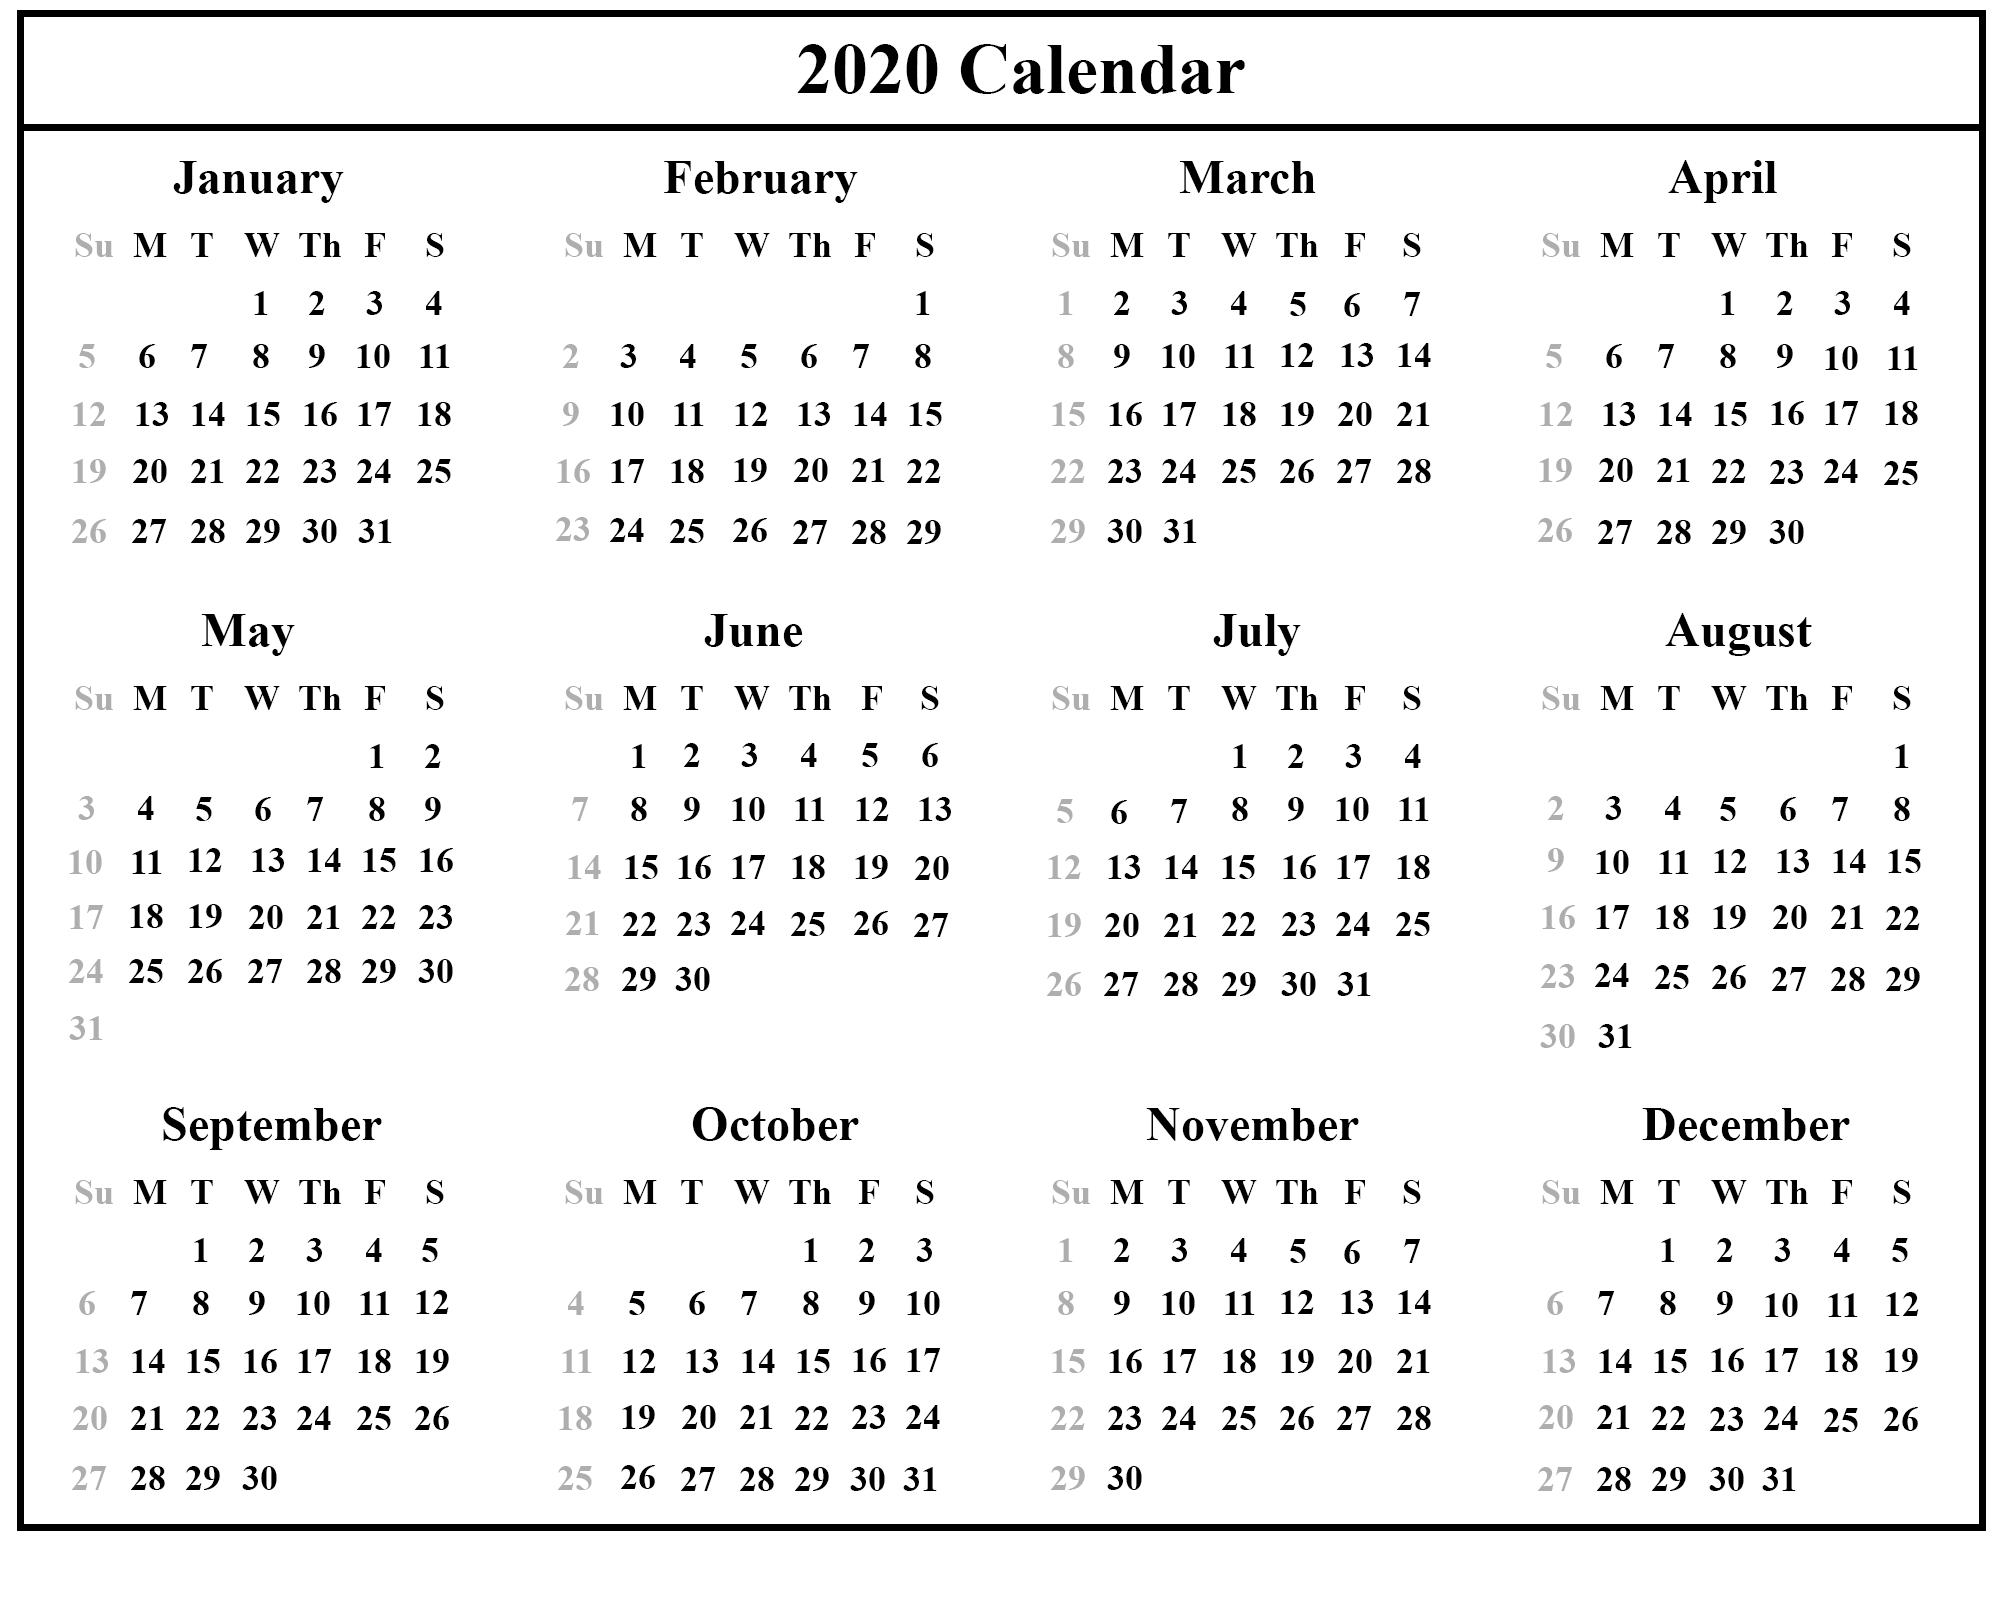 Monthly Calendar 2020 With Holidays Template | Example